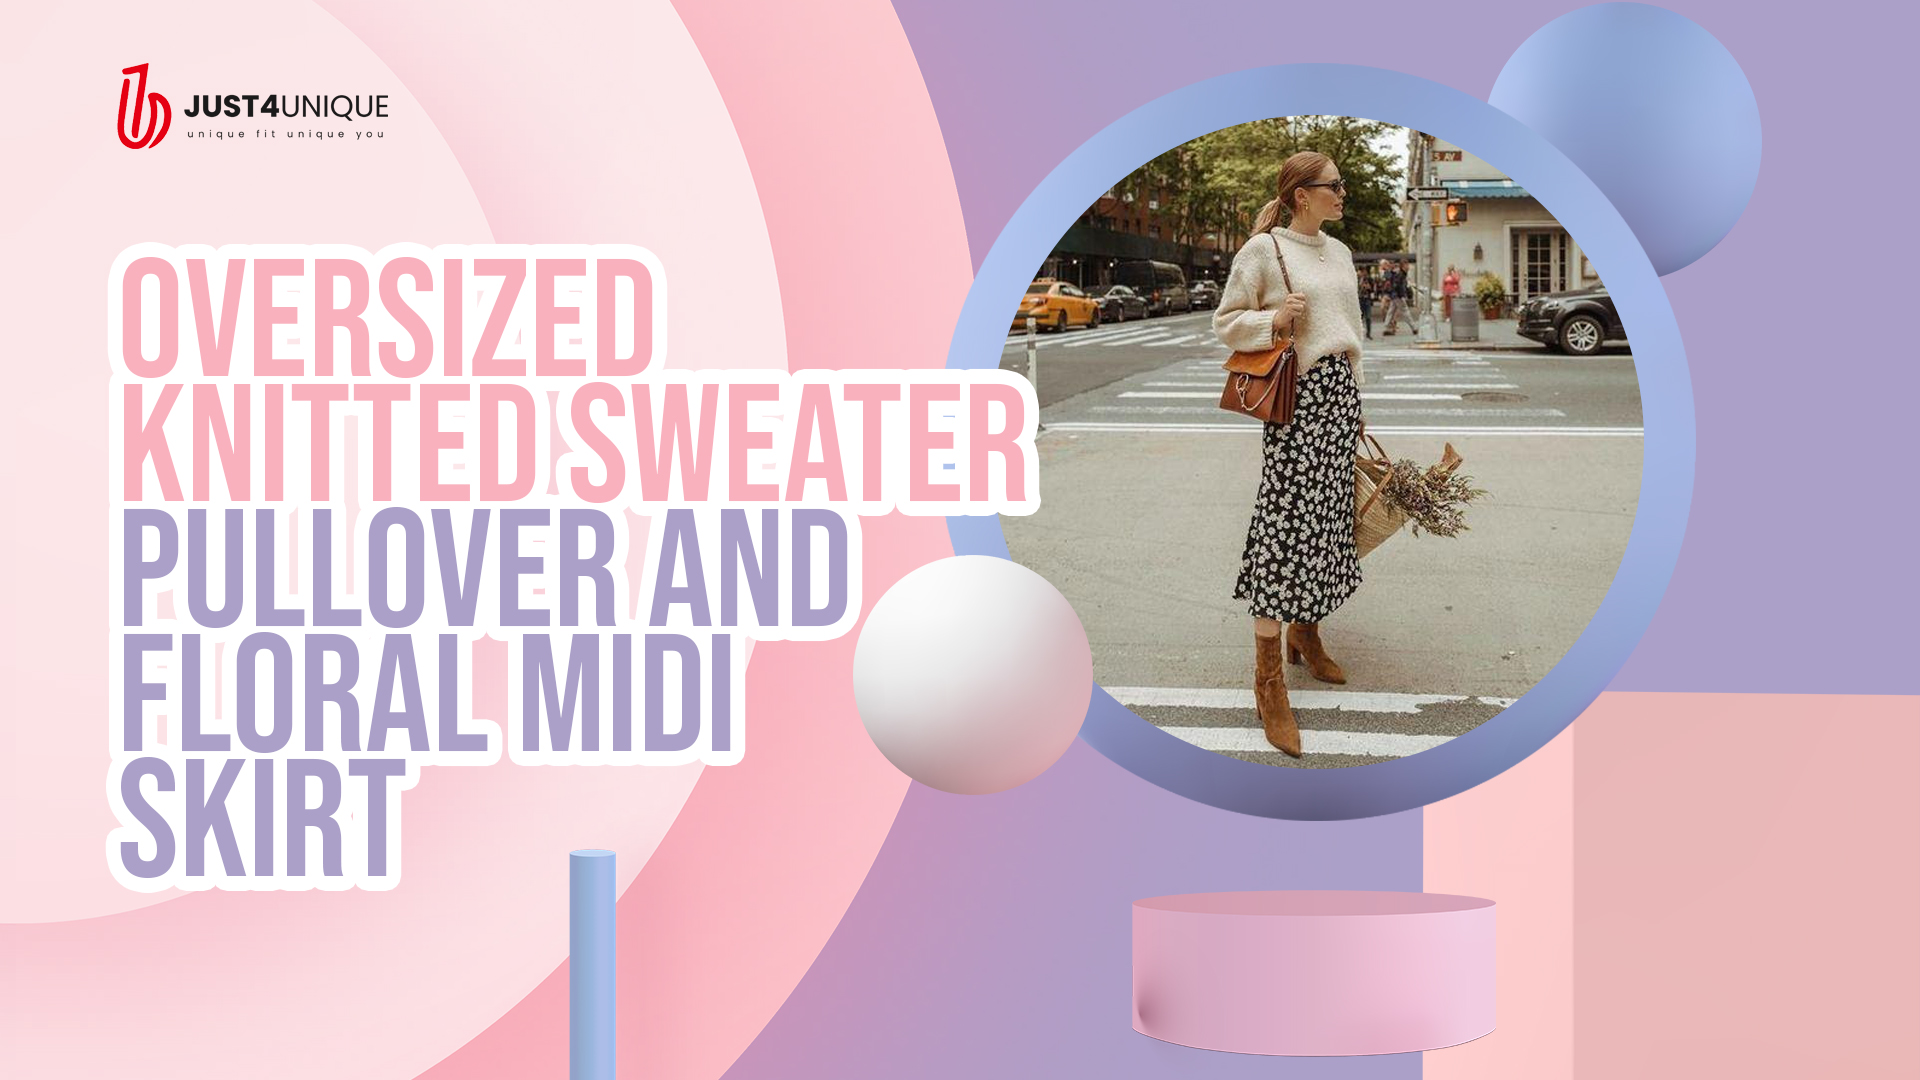 A woman standing beside the pedestrian lane holding her brown shoulder bag wearing an oversized knitted sweater pullover and floral midi skirt.